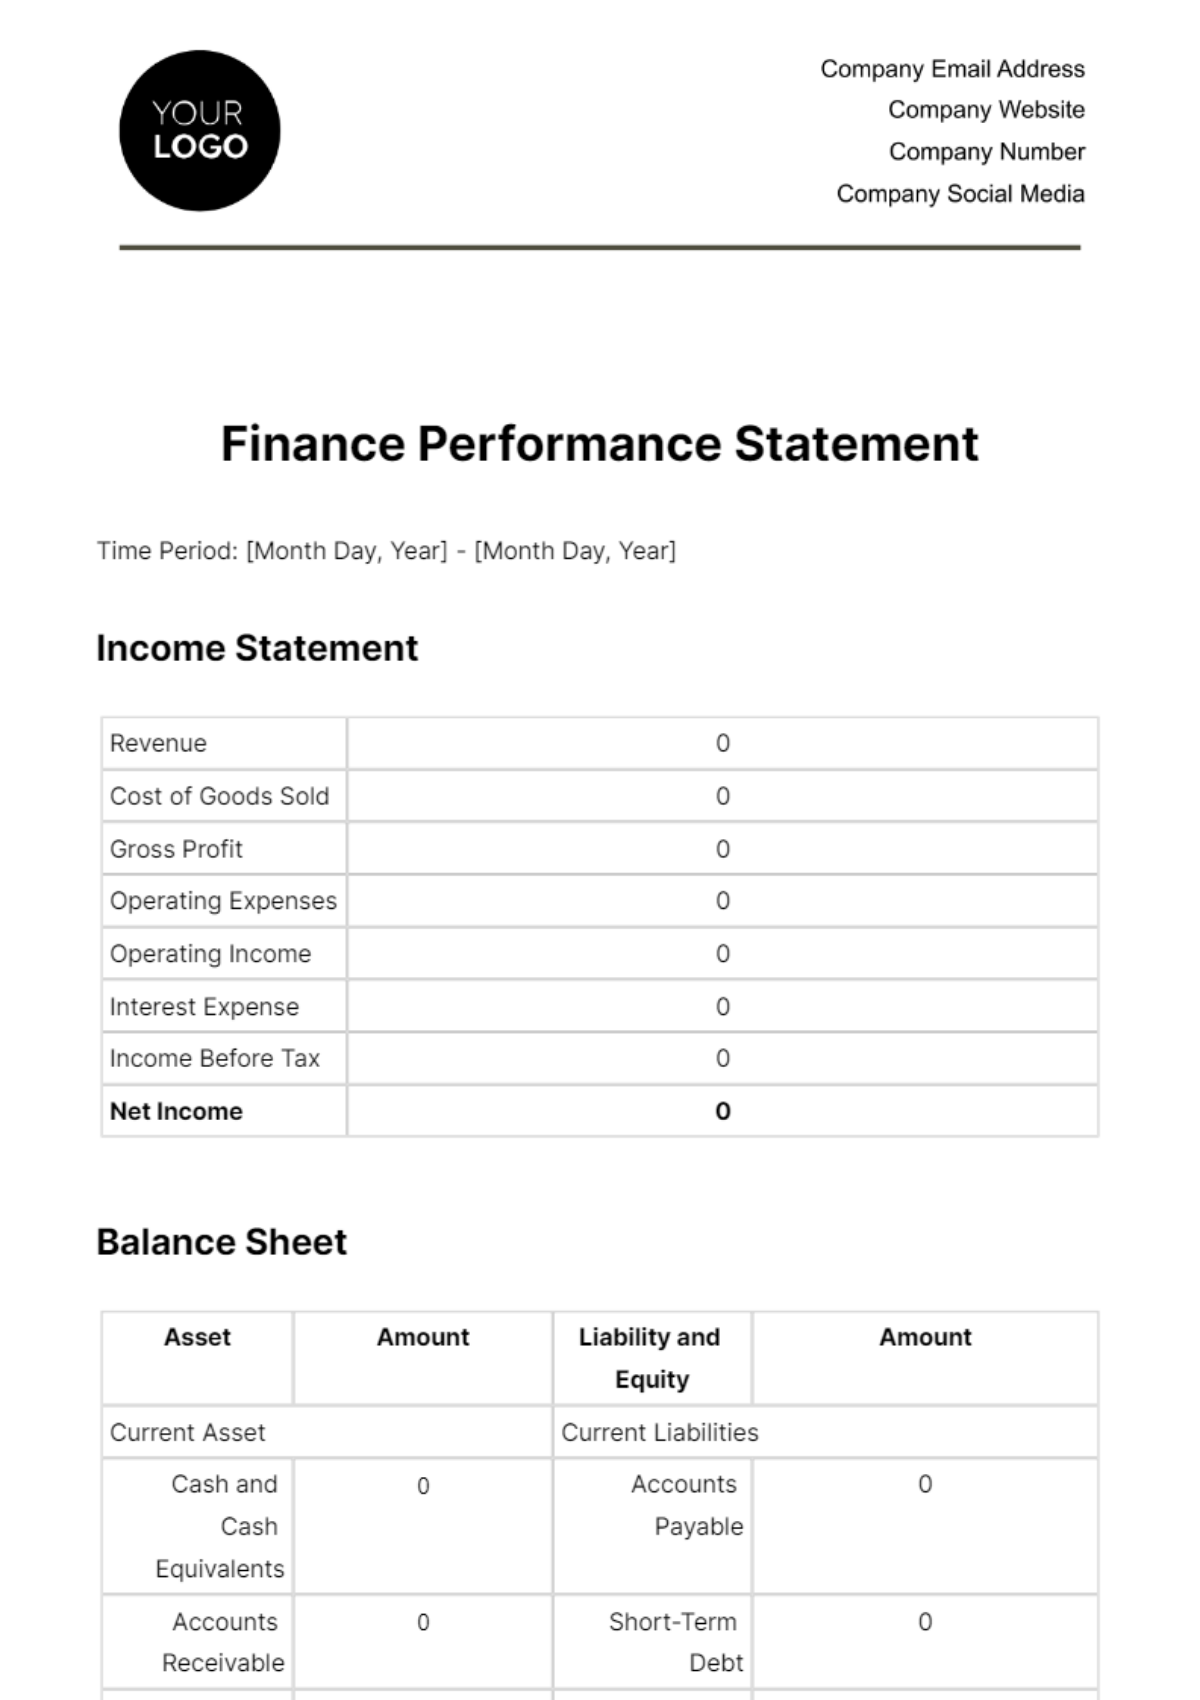 Financial Performance Statement Template